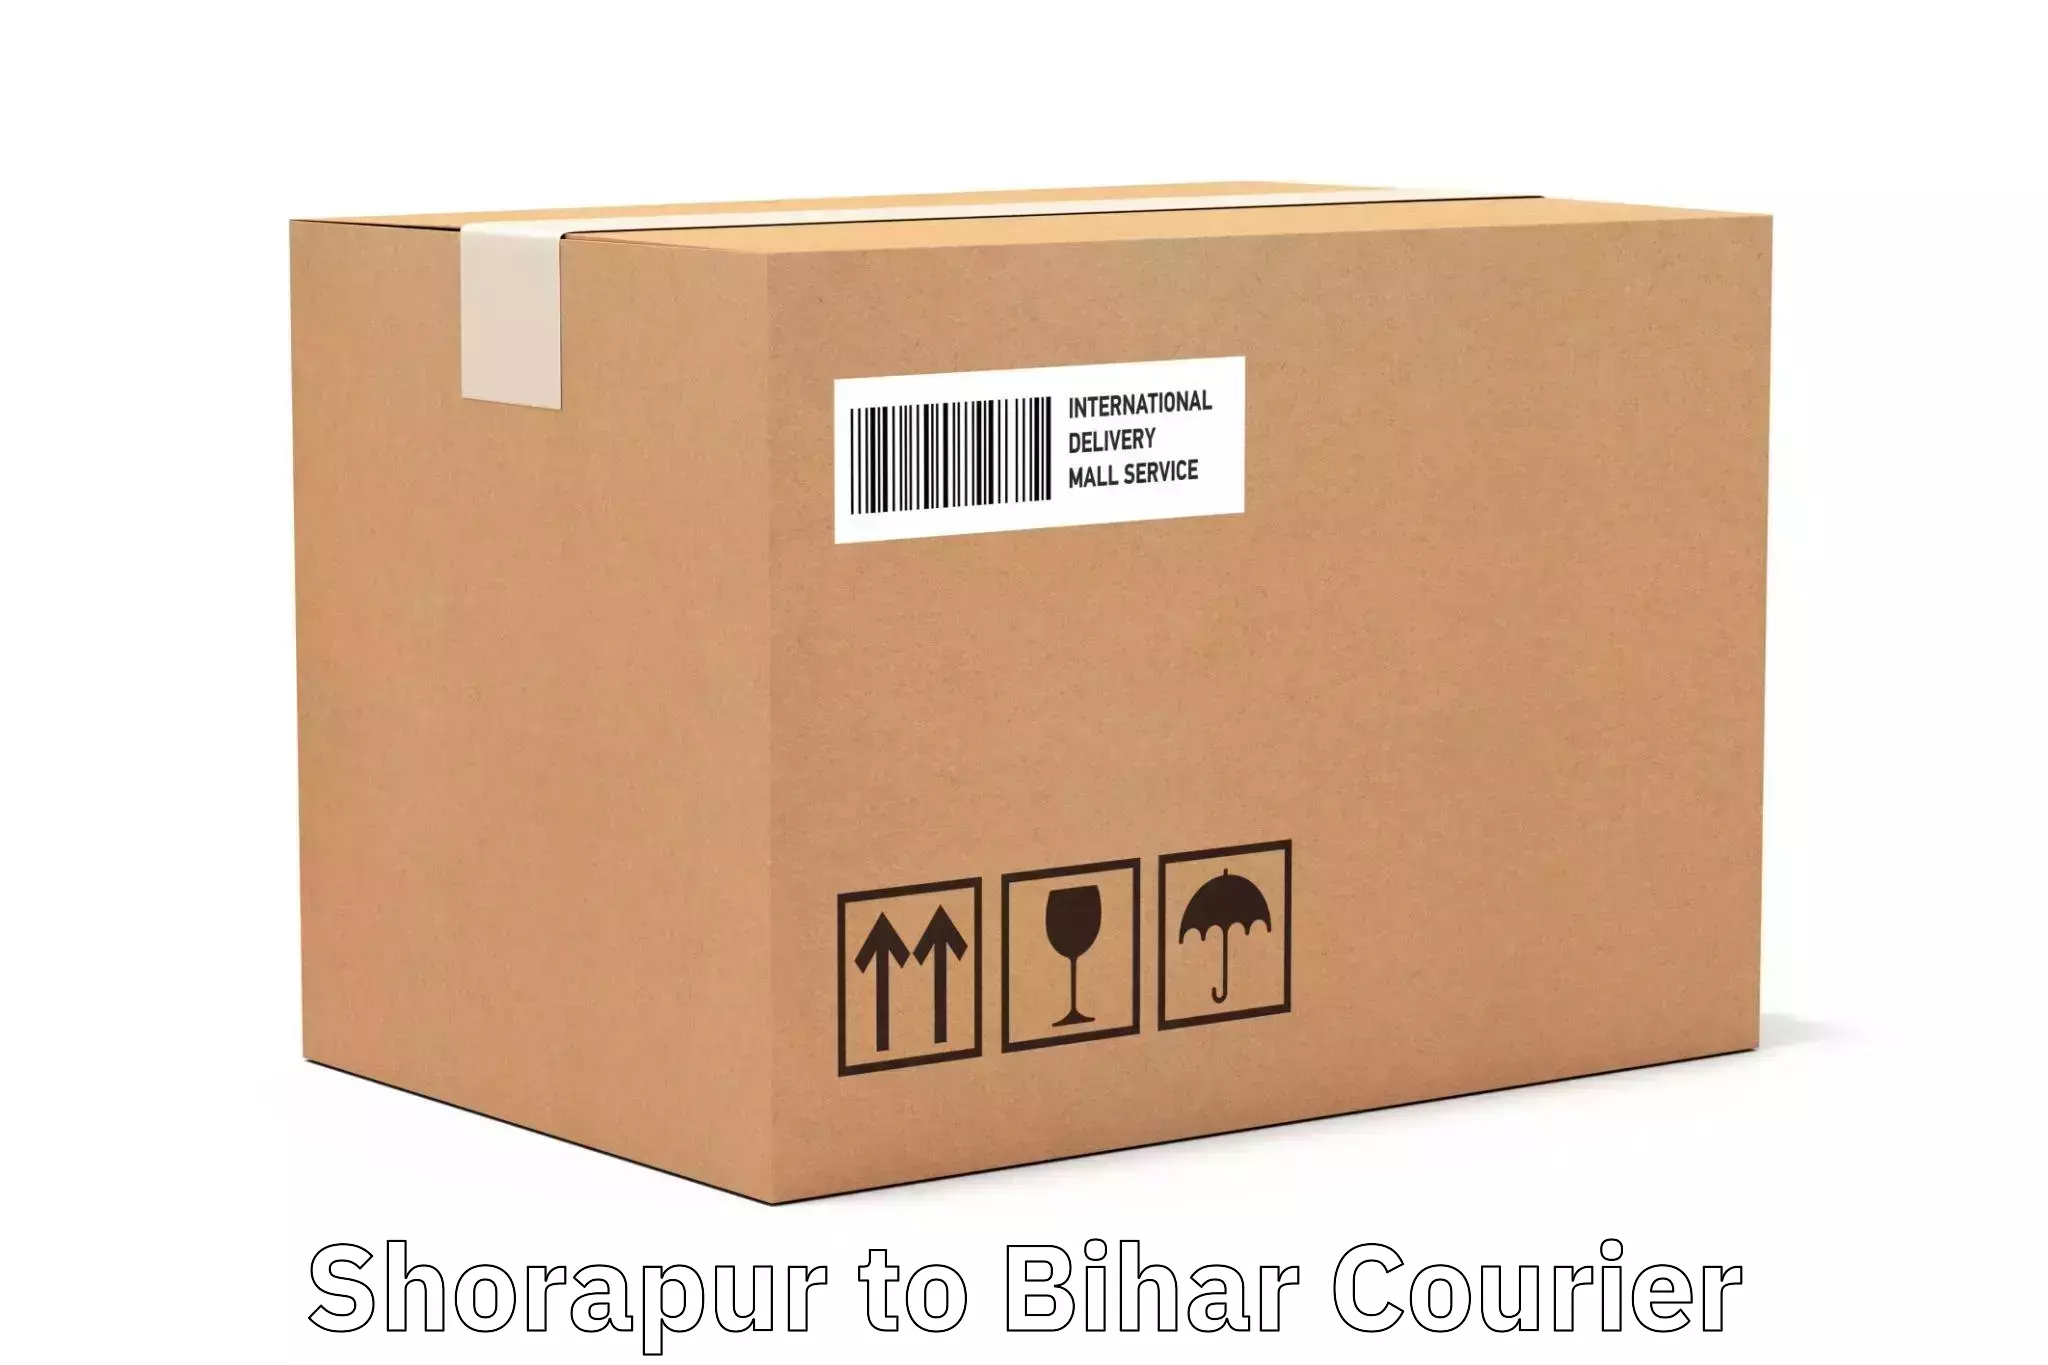 Sustainable courier practices Shorapur to Forbesganj